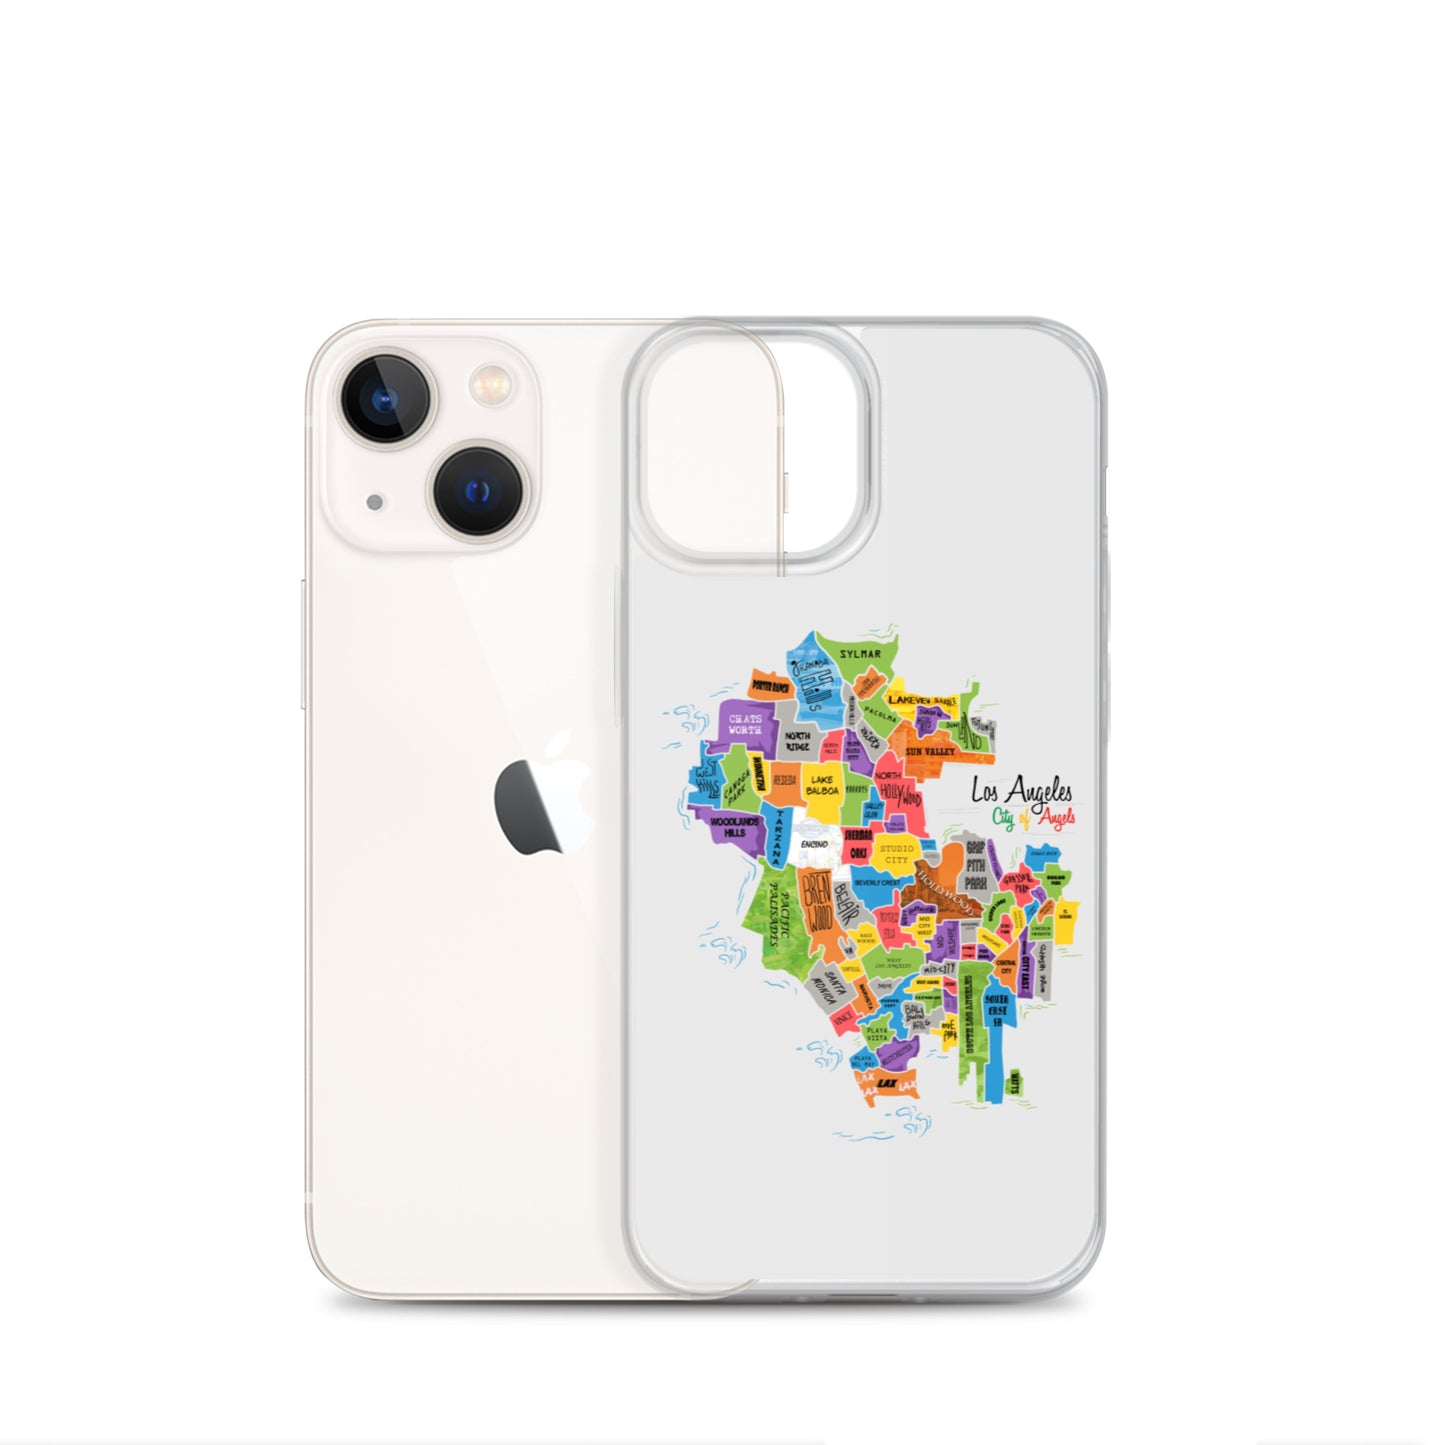 Los Angeles Map iPhone Case